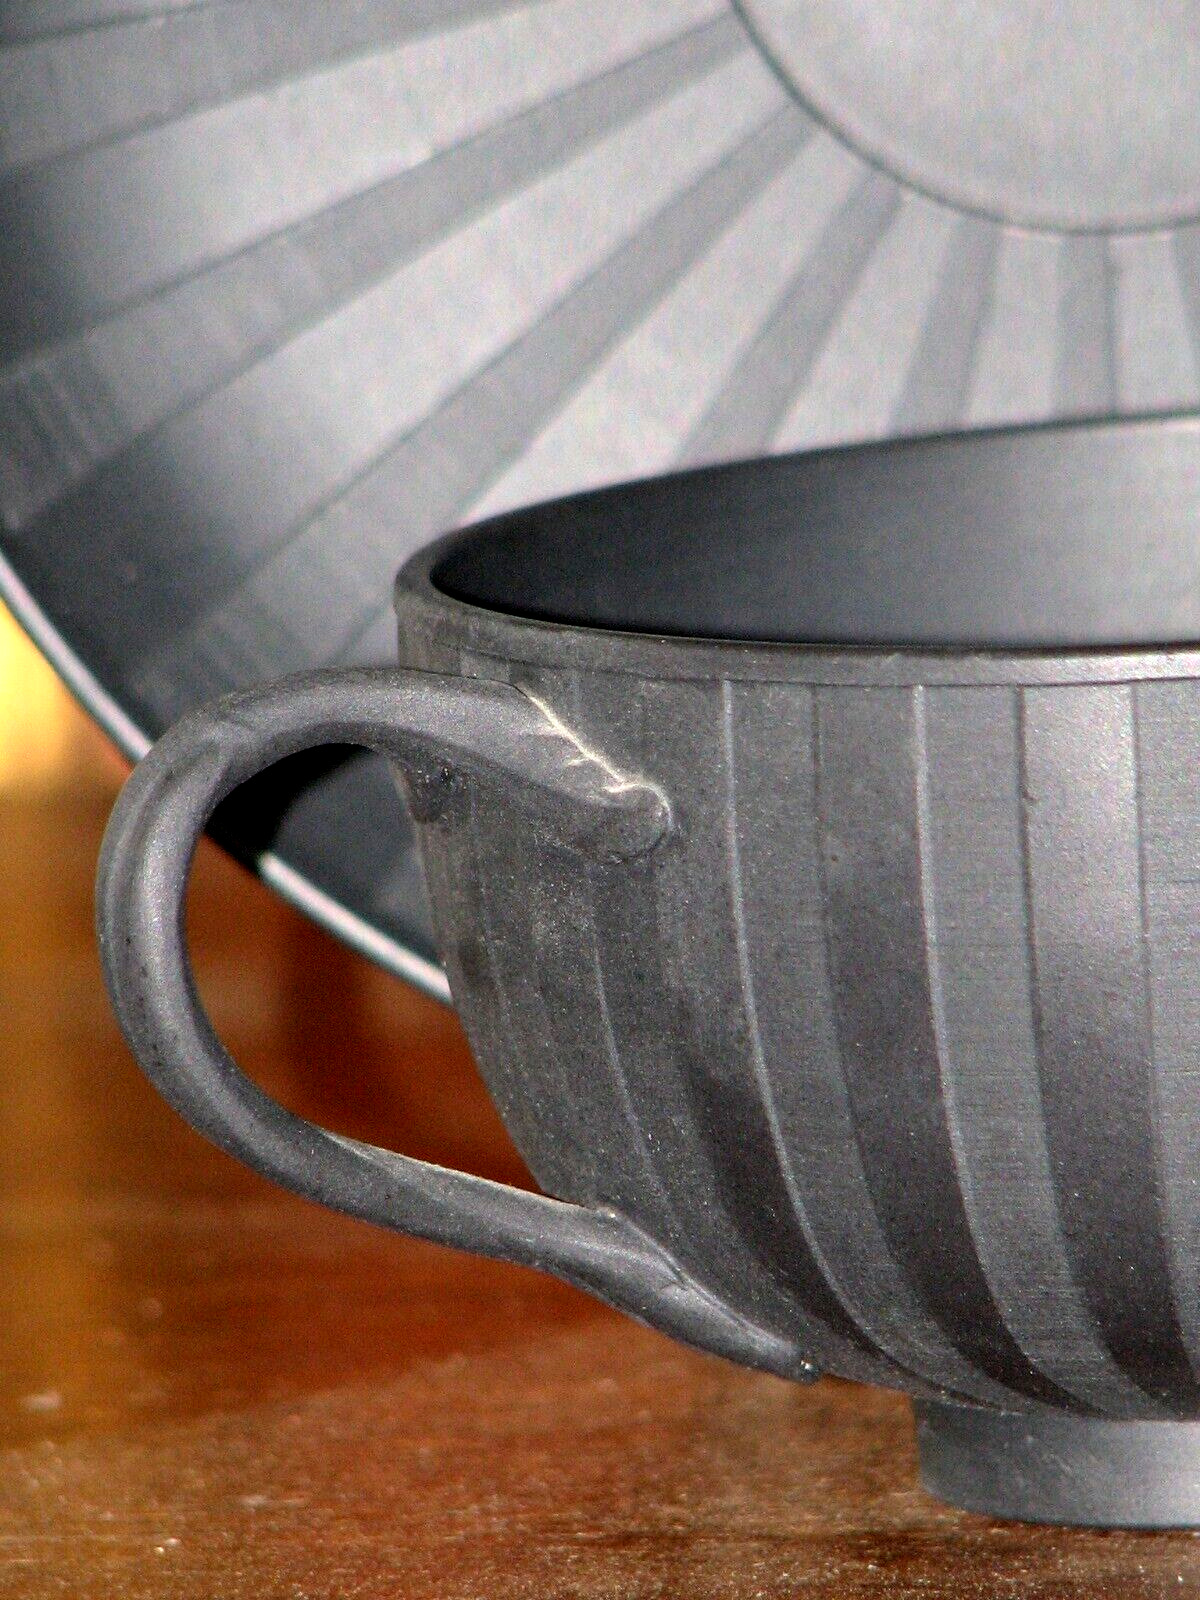 WEDGWOOD C.1800 RARE BLACK BASALT ENGINE TURNED CUP/SAUCER 3 AVAILABLE MUSEUM